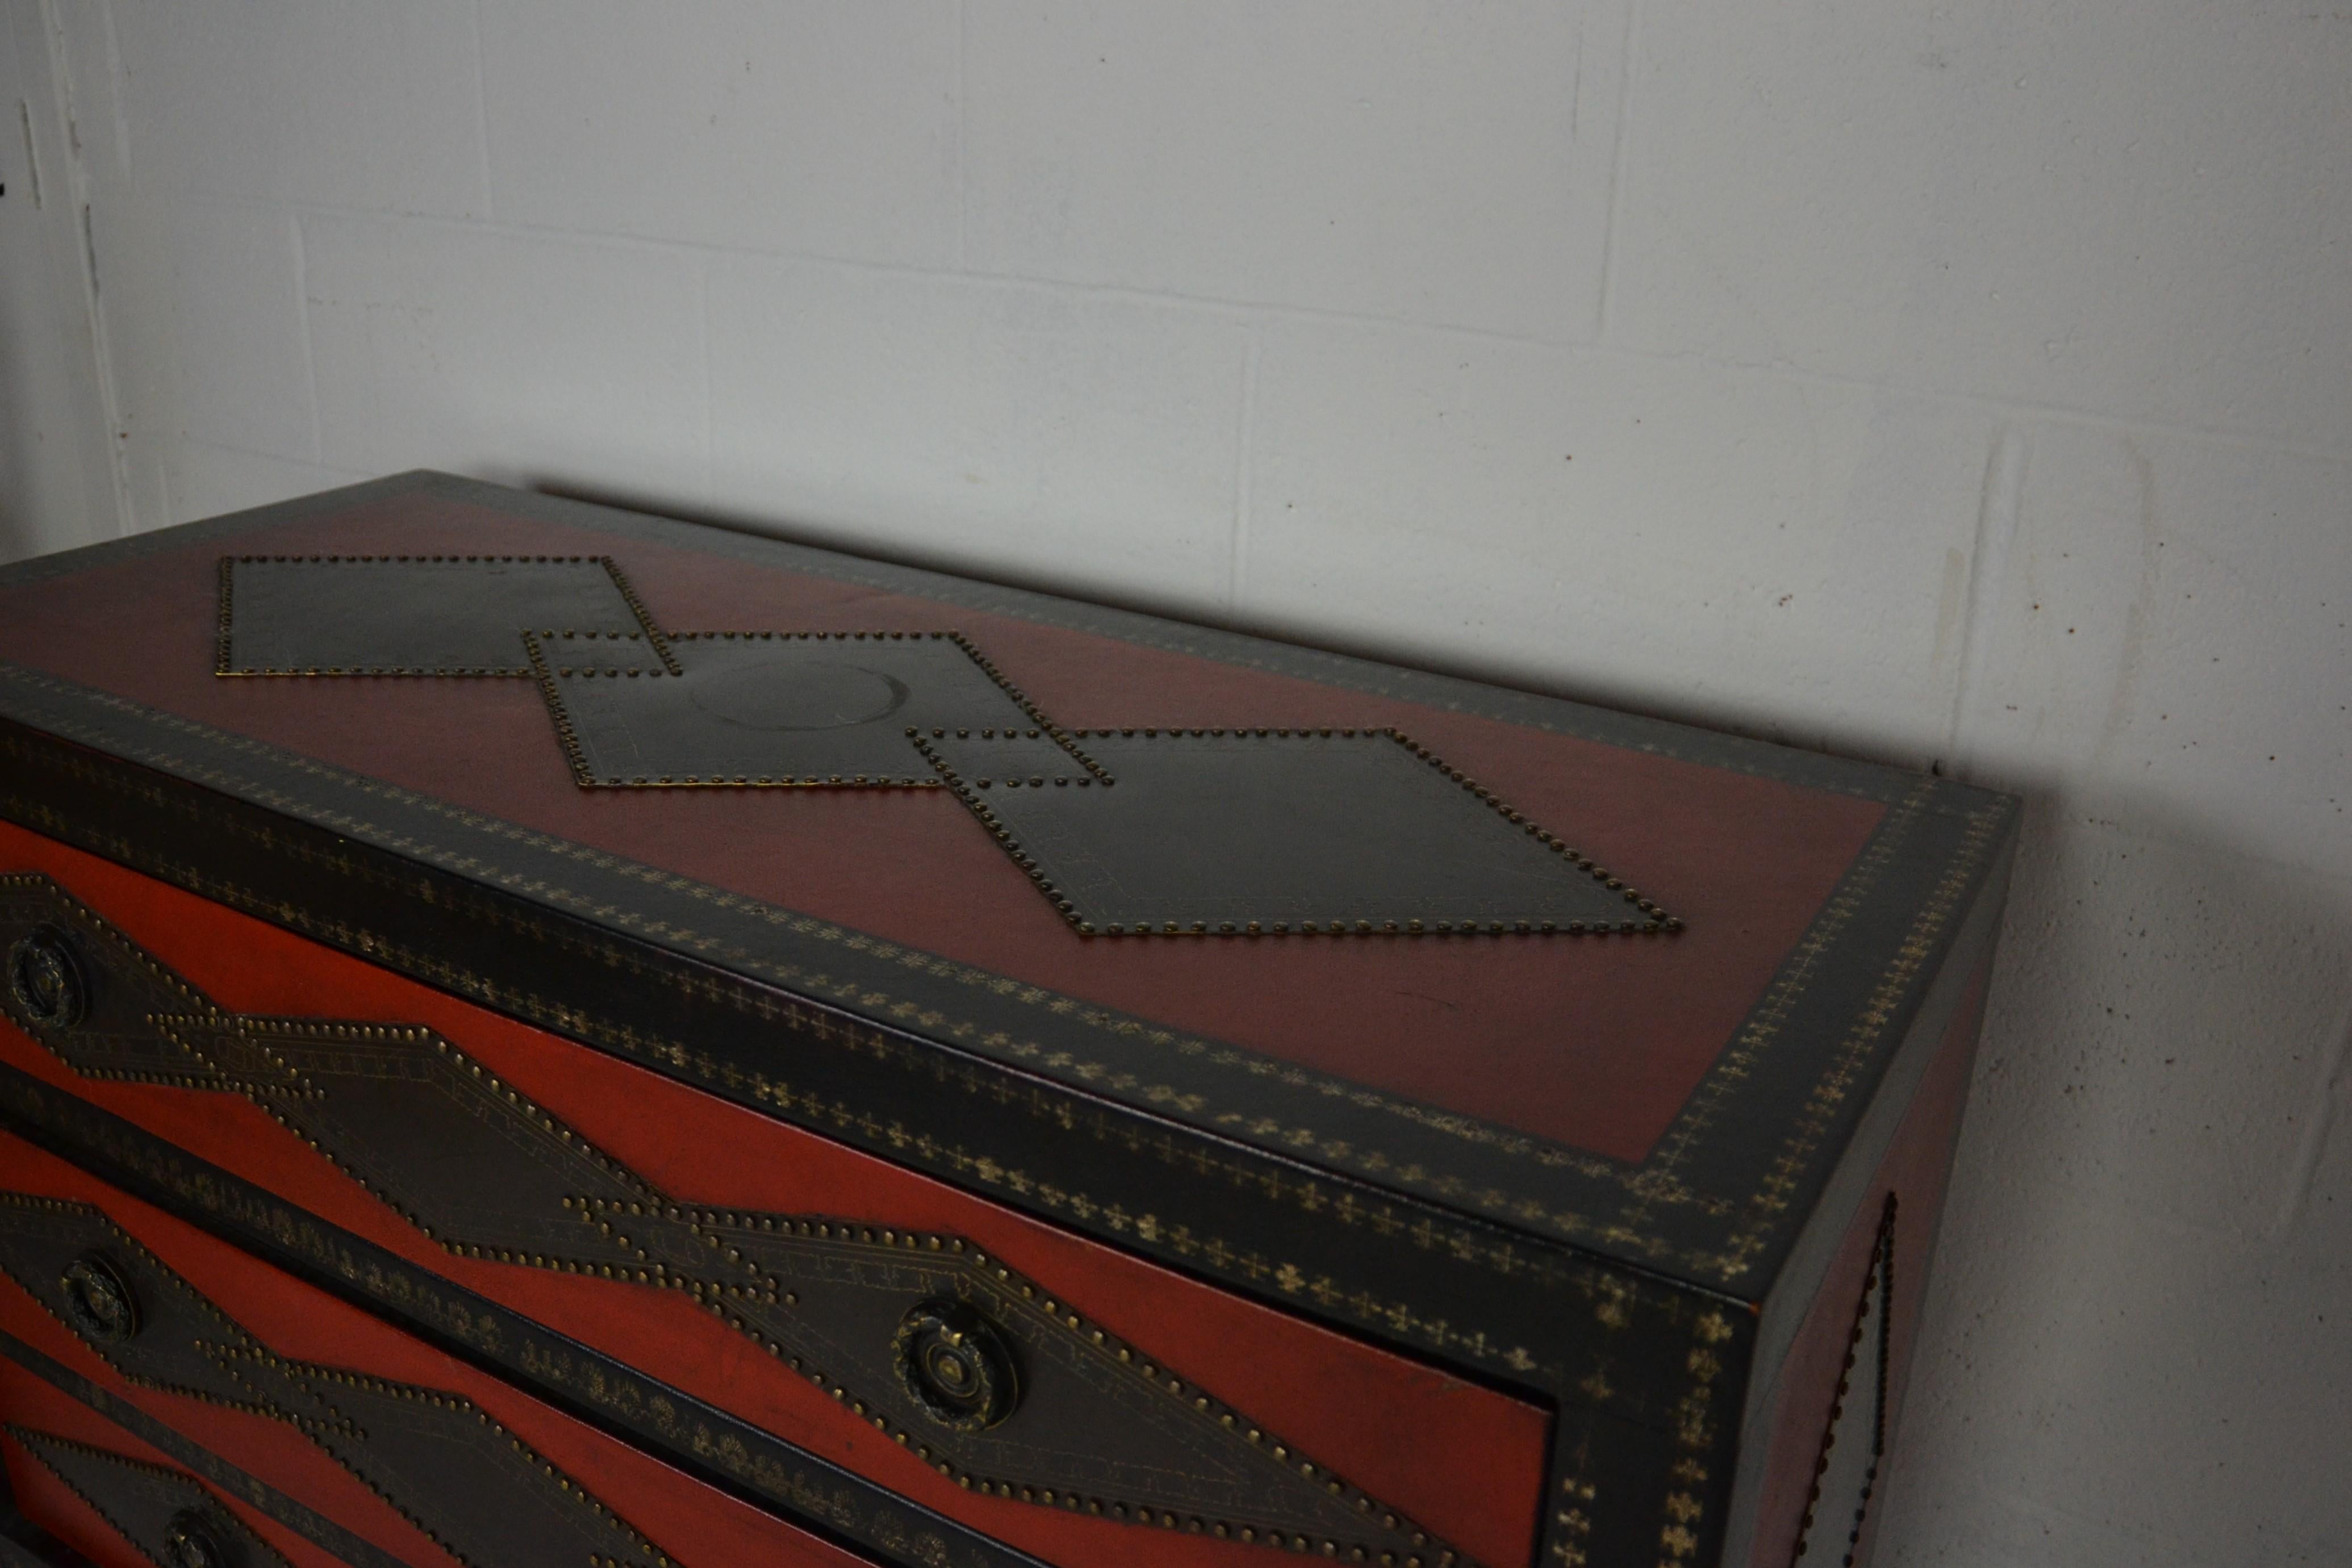 Chest of drawers clad in black and red leather. The applied diamond-shaped panels are in metal with a dark patina and edged with metal studs. Probably copper or brass. The edges of the chest are tooled-leather. Even the top drawer edges are tooled